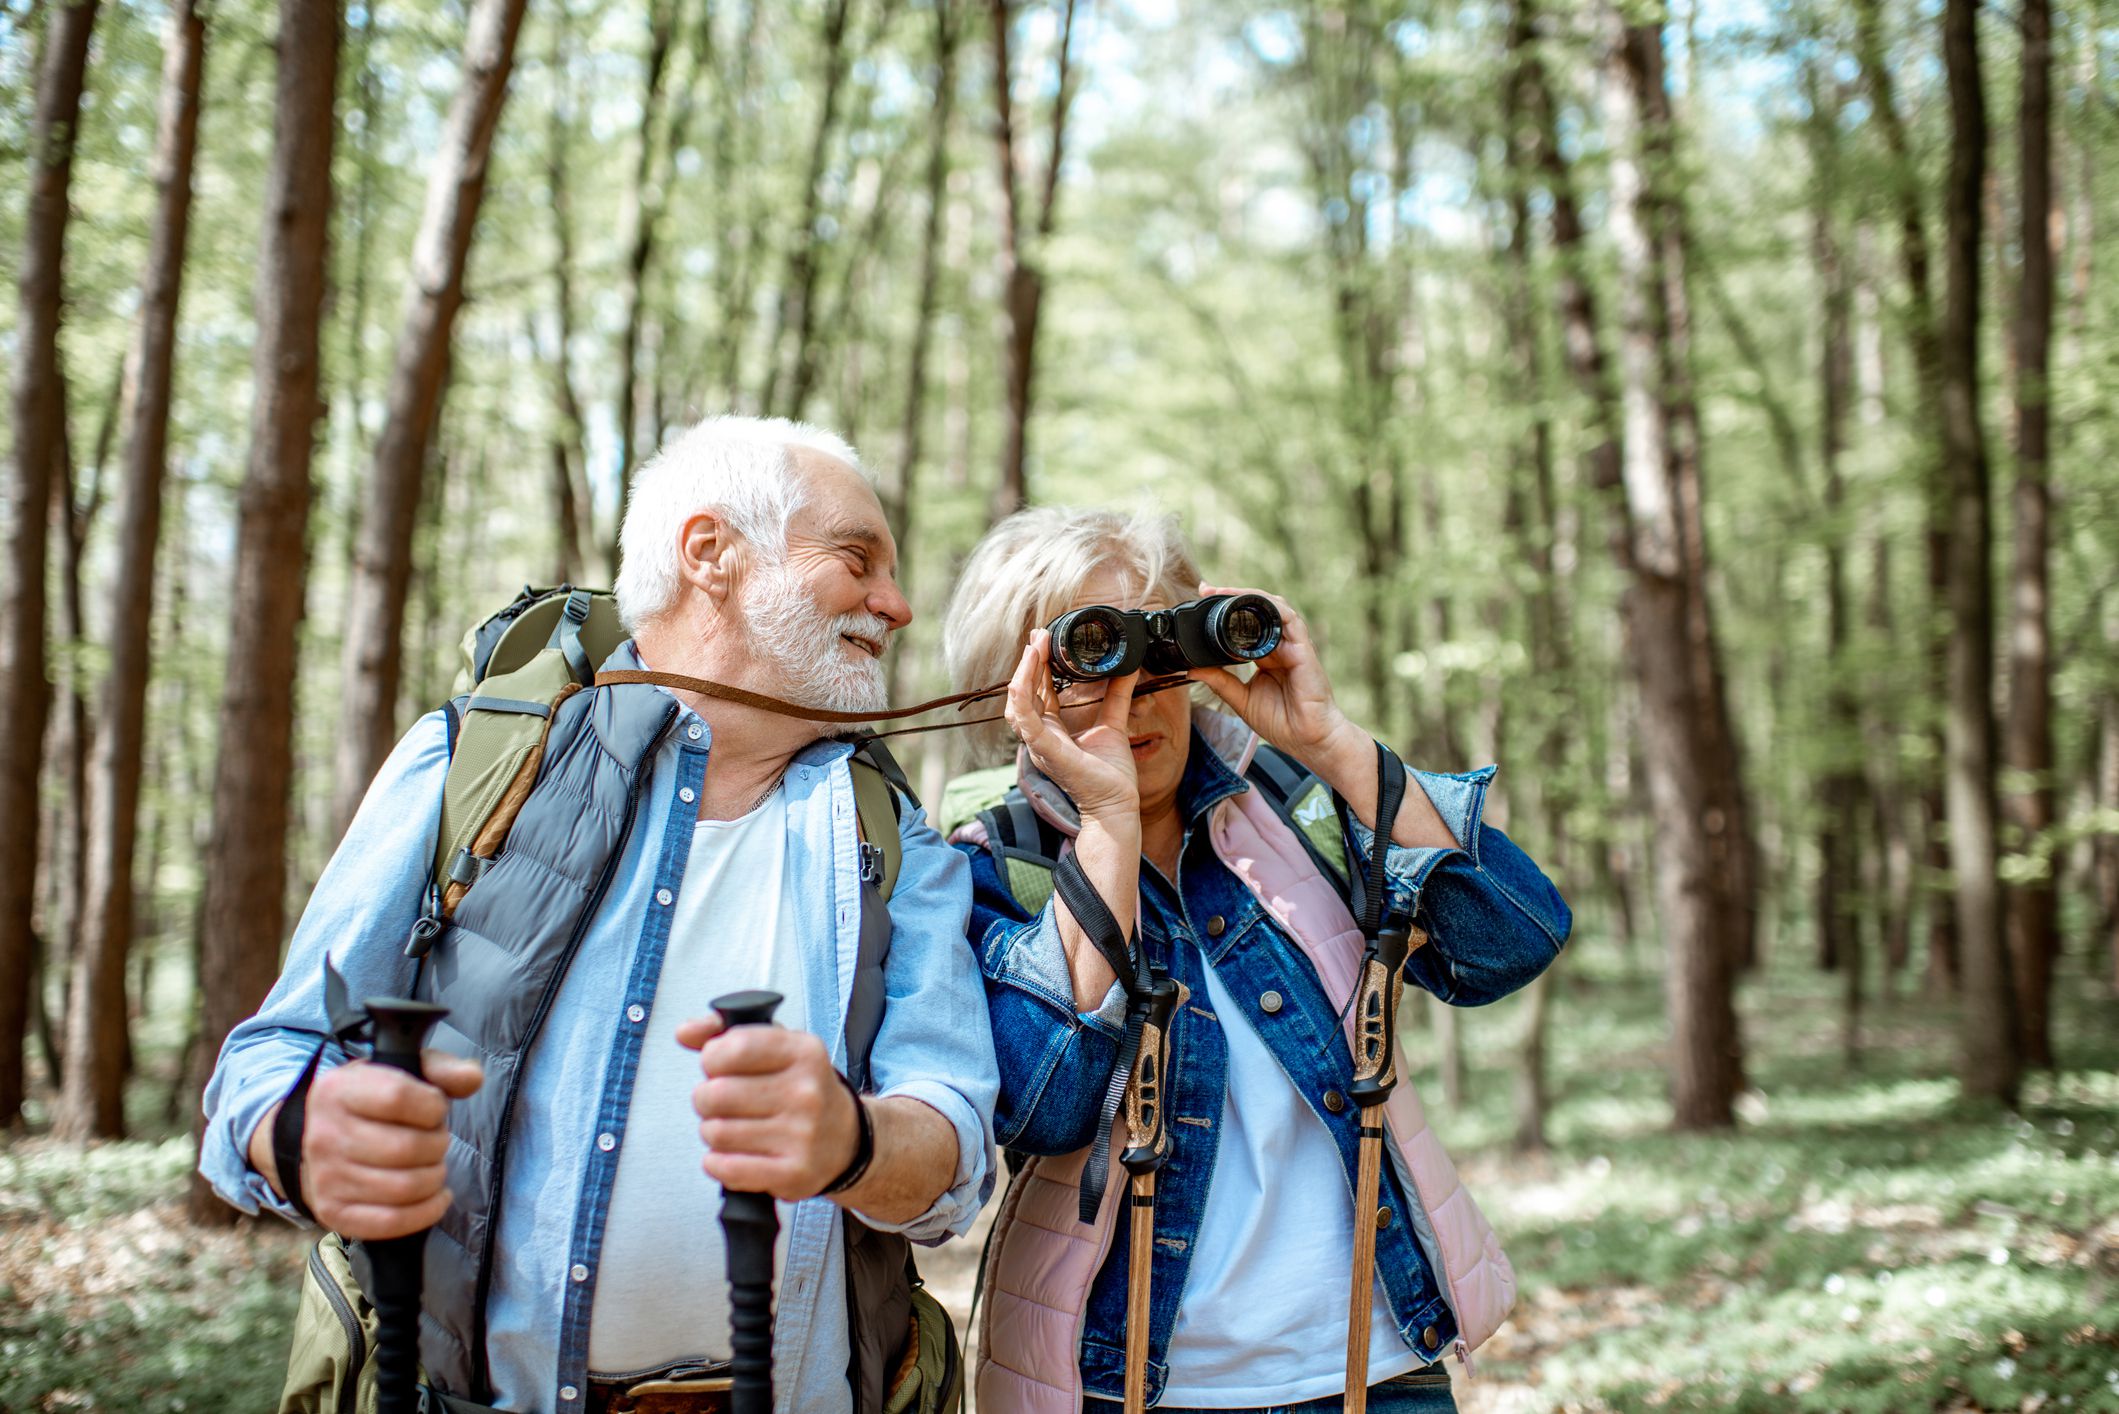 <p>Bird watching is an easy hobby to get started with; you need a decent pair of binoculars and a bird guide, and you’re set. This is also a peaceful option for anyone looking to get outside and into nature. </p><p><em>“Bird watching as a hobby is incredibly flexible. You can get started in your back yard or find a local group to share your new passion with, and it’s thrilling to spot rare birds in your area,”</em> says Kasey Turner from<a href="https://naturenibble.com/"> NatureNibble</a>.</p><p>Did you know that there are over 260 species of bird currently on the endangered list? Bird watching is a great way to spot rare birds, bring awareness to endangered populations, and even help track efforts. </p><p>Plus, being outdoors and enjoying wildlife positively impacts your well-being. <a href="https://www.tandfonline.com/doi/abs/10.1080/09603123.2021.1879739">Research shows</a> spending time in nature every day can reduce blood pressure, heart rate, and muscle tension. Ecotherapy is even used as a treatment for depression and anxiety. </p><p>Grab a pair of binoculars, a bird guide, and some snacks to get started. If you plan on going to marshland or a dedicated bird-watching spot, you might also need some decent shoes and warm clothing.  </p>